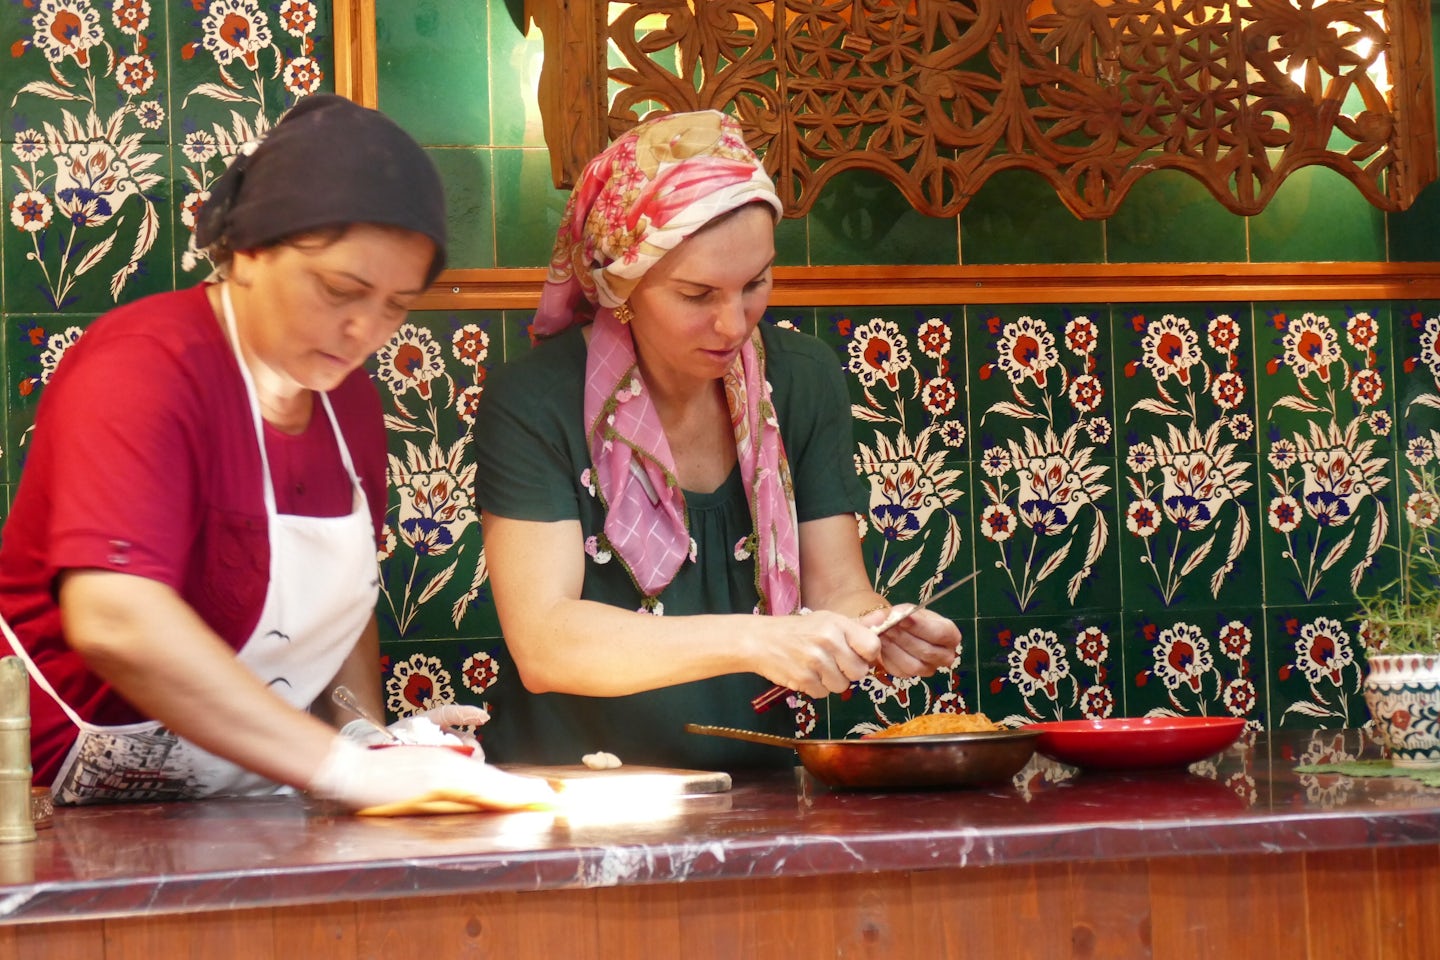 Our hosts demonstrating Turkish Cooking